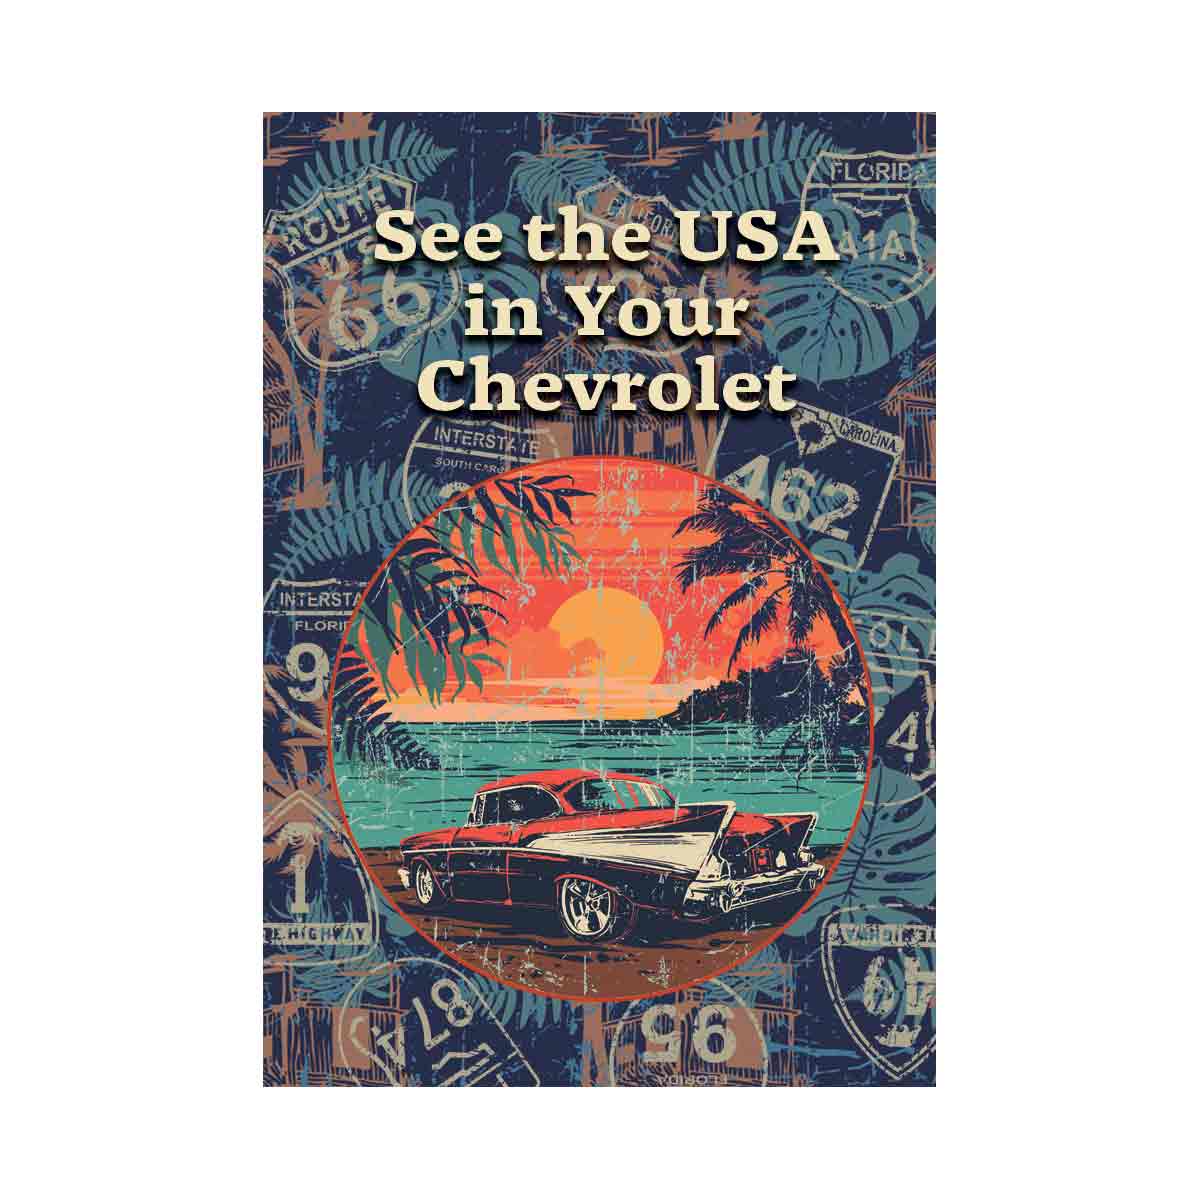 See the USA in your chevrolet